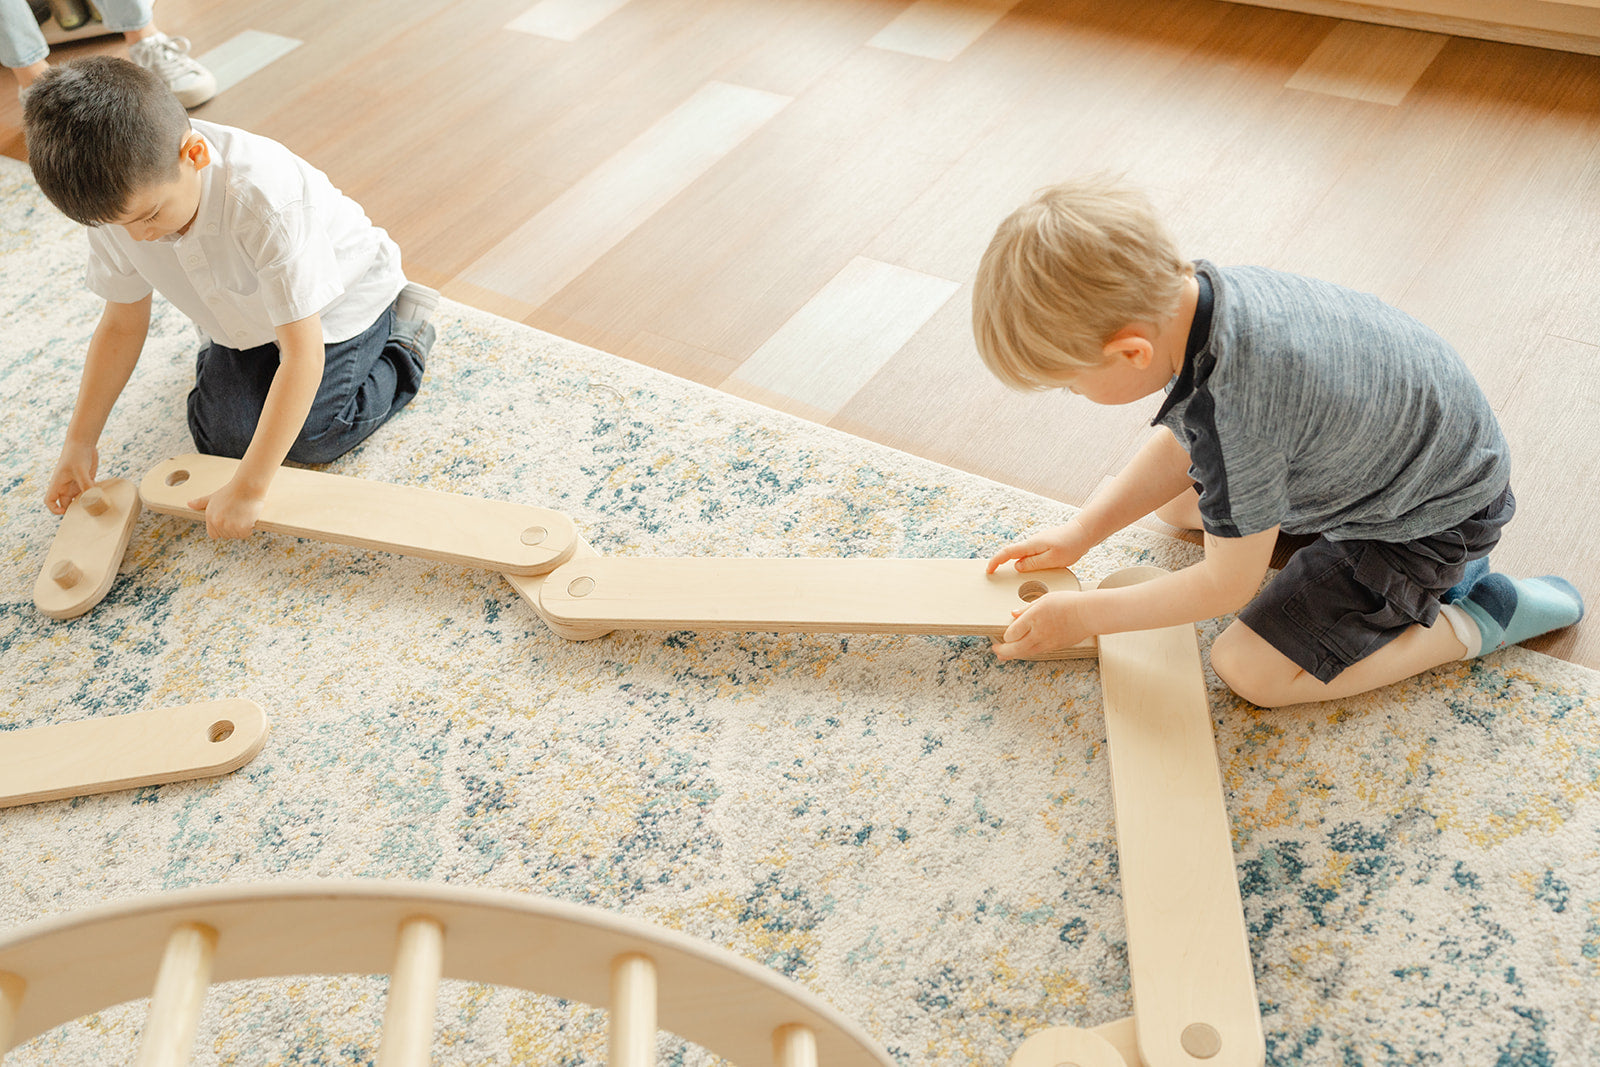 Two boys working together to build the modular wooden balance beam to complete their obstacle course